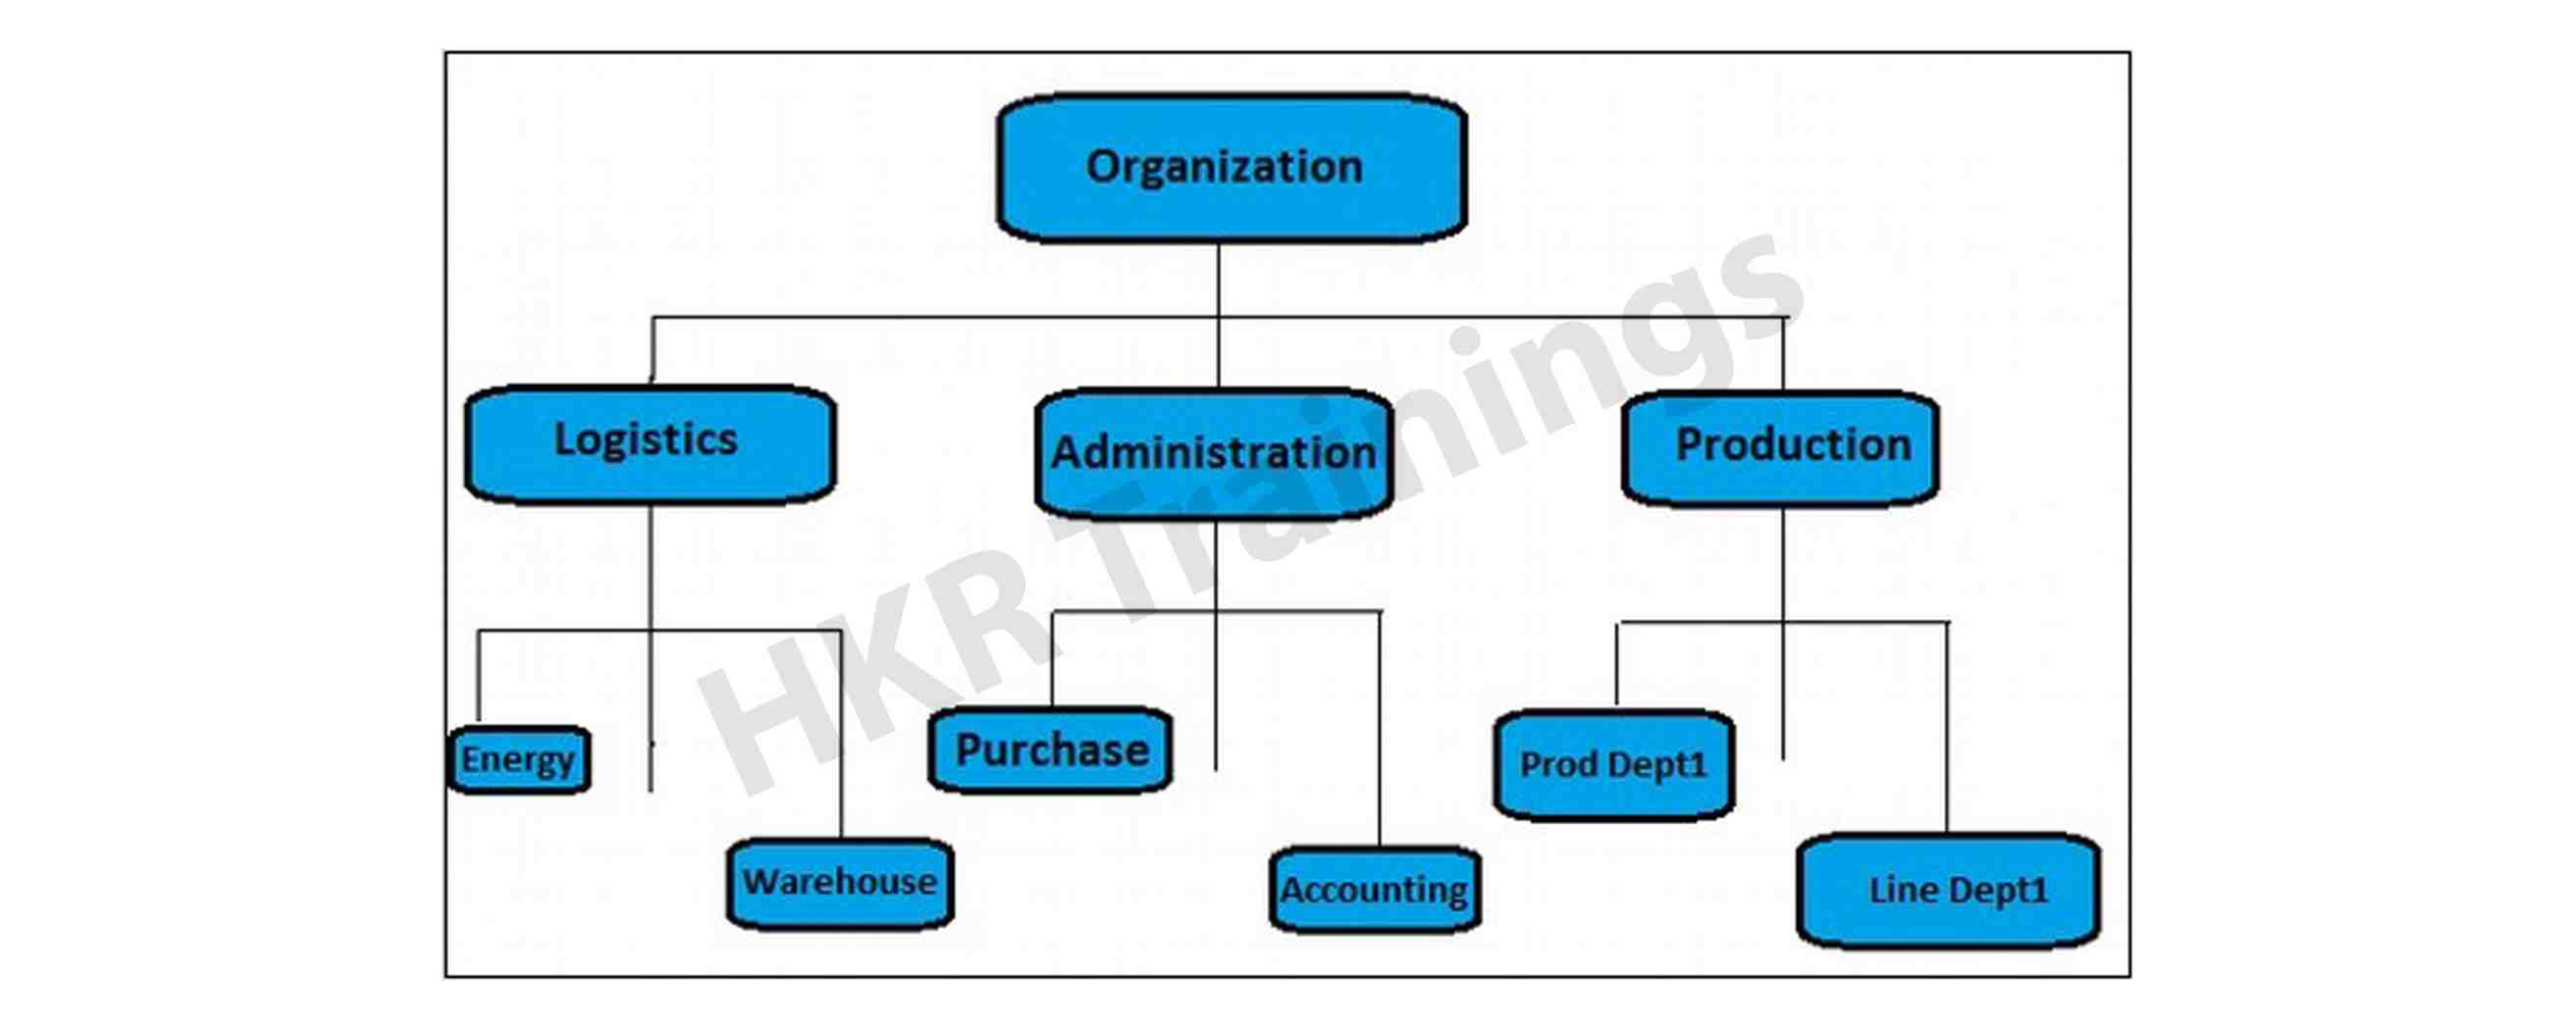 Cost center hierarchy